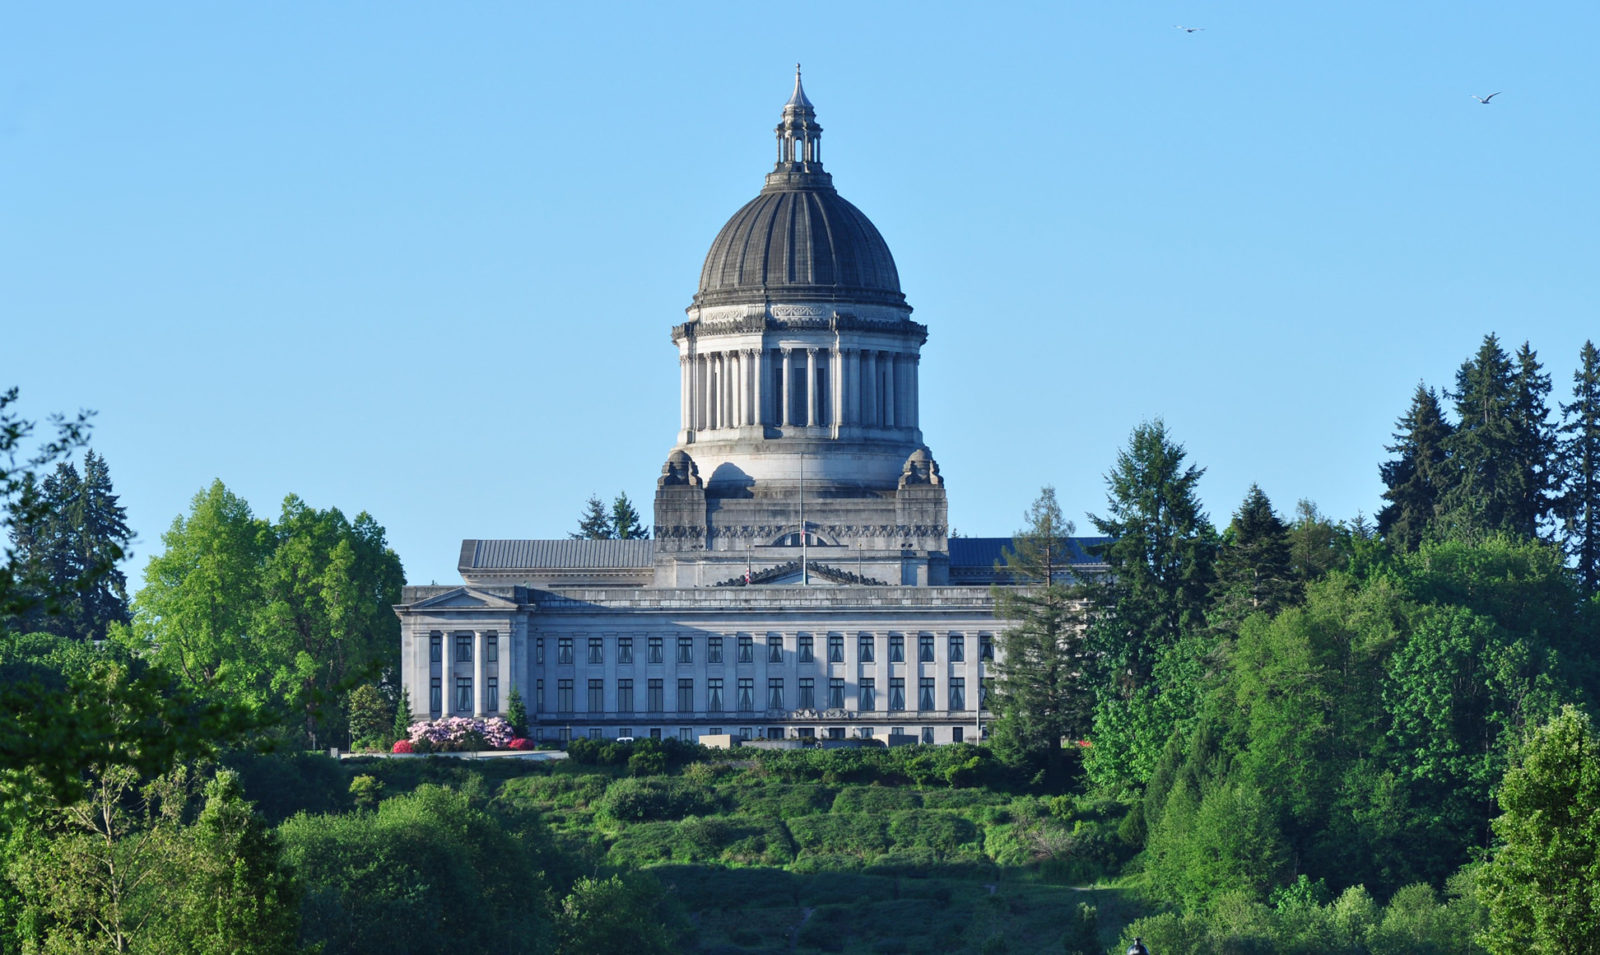 Photo of the Washington State Capitol Building in Olympia